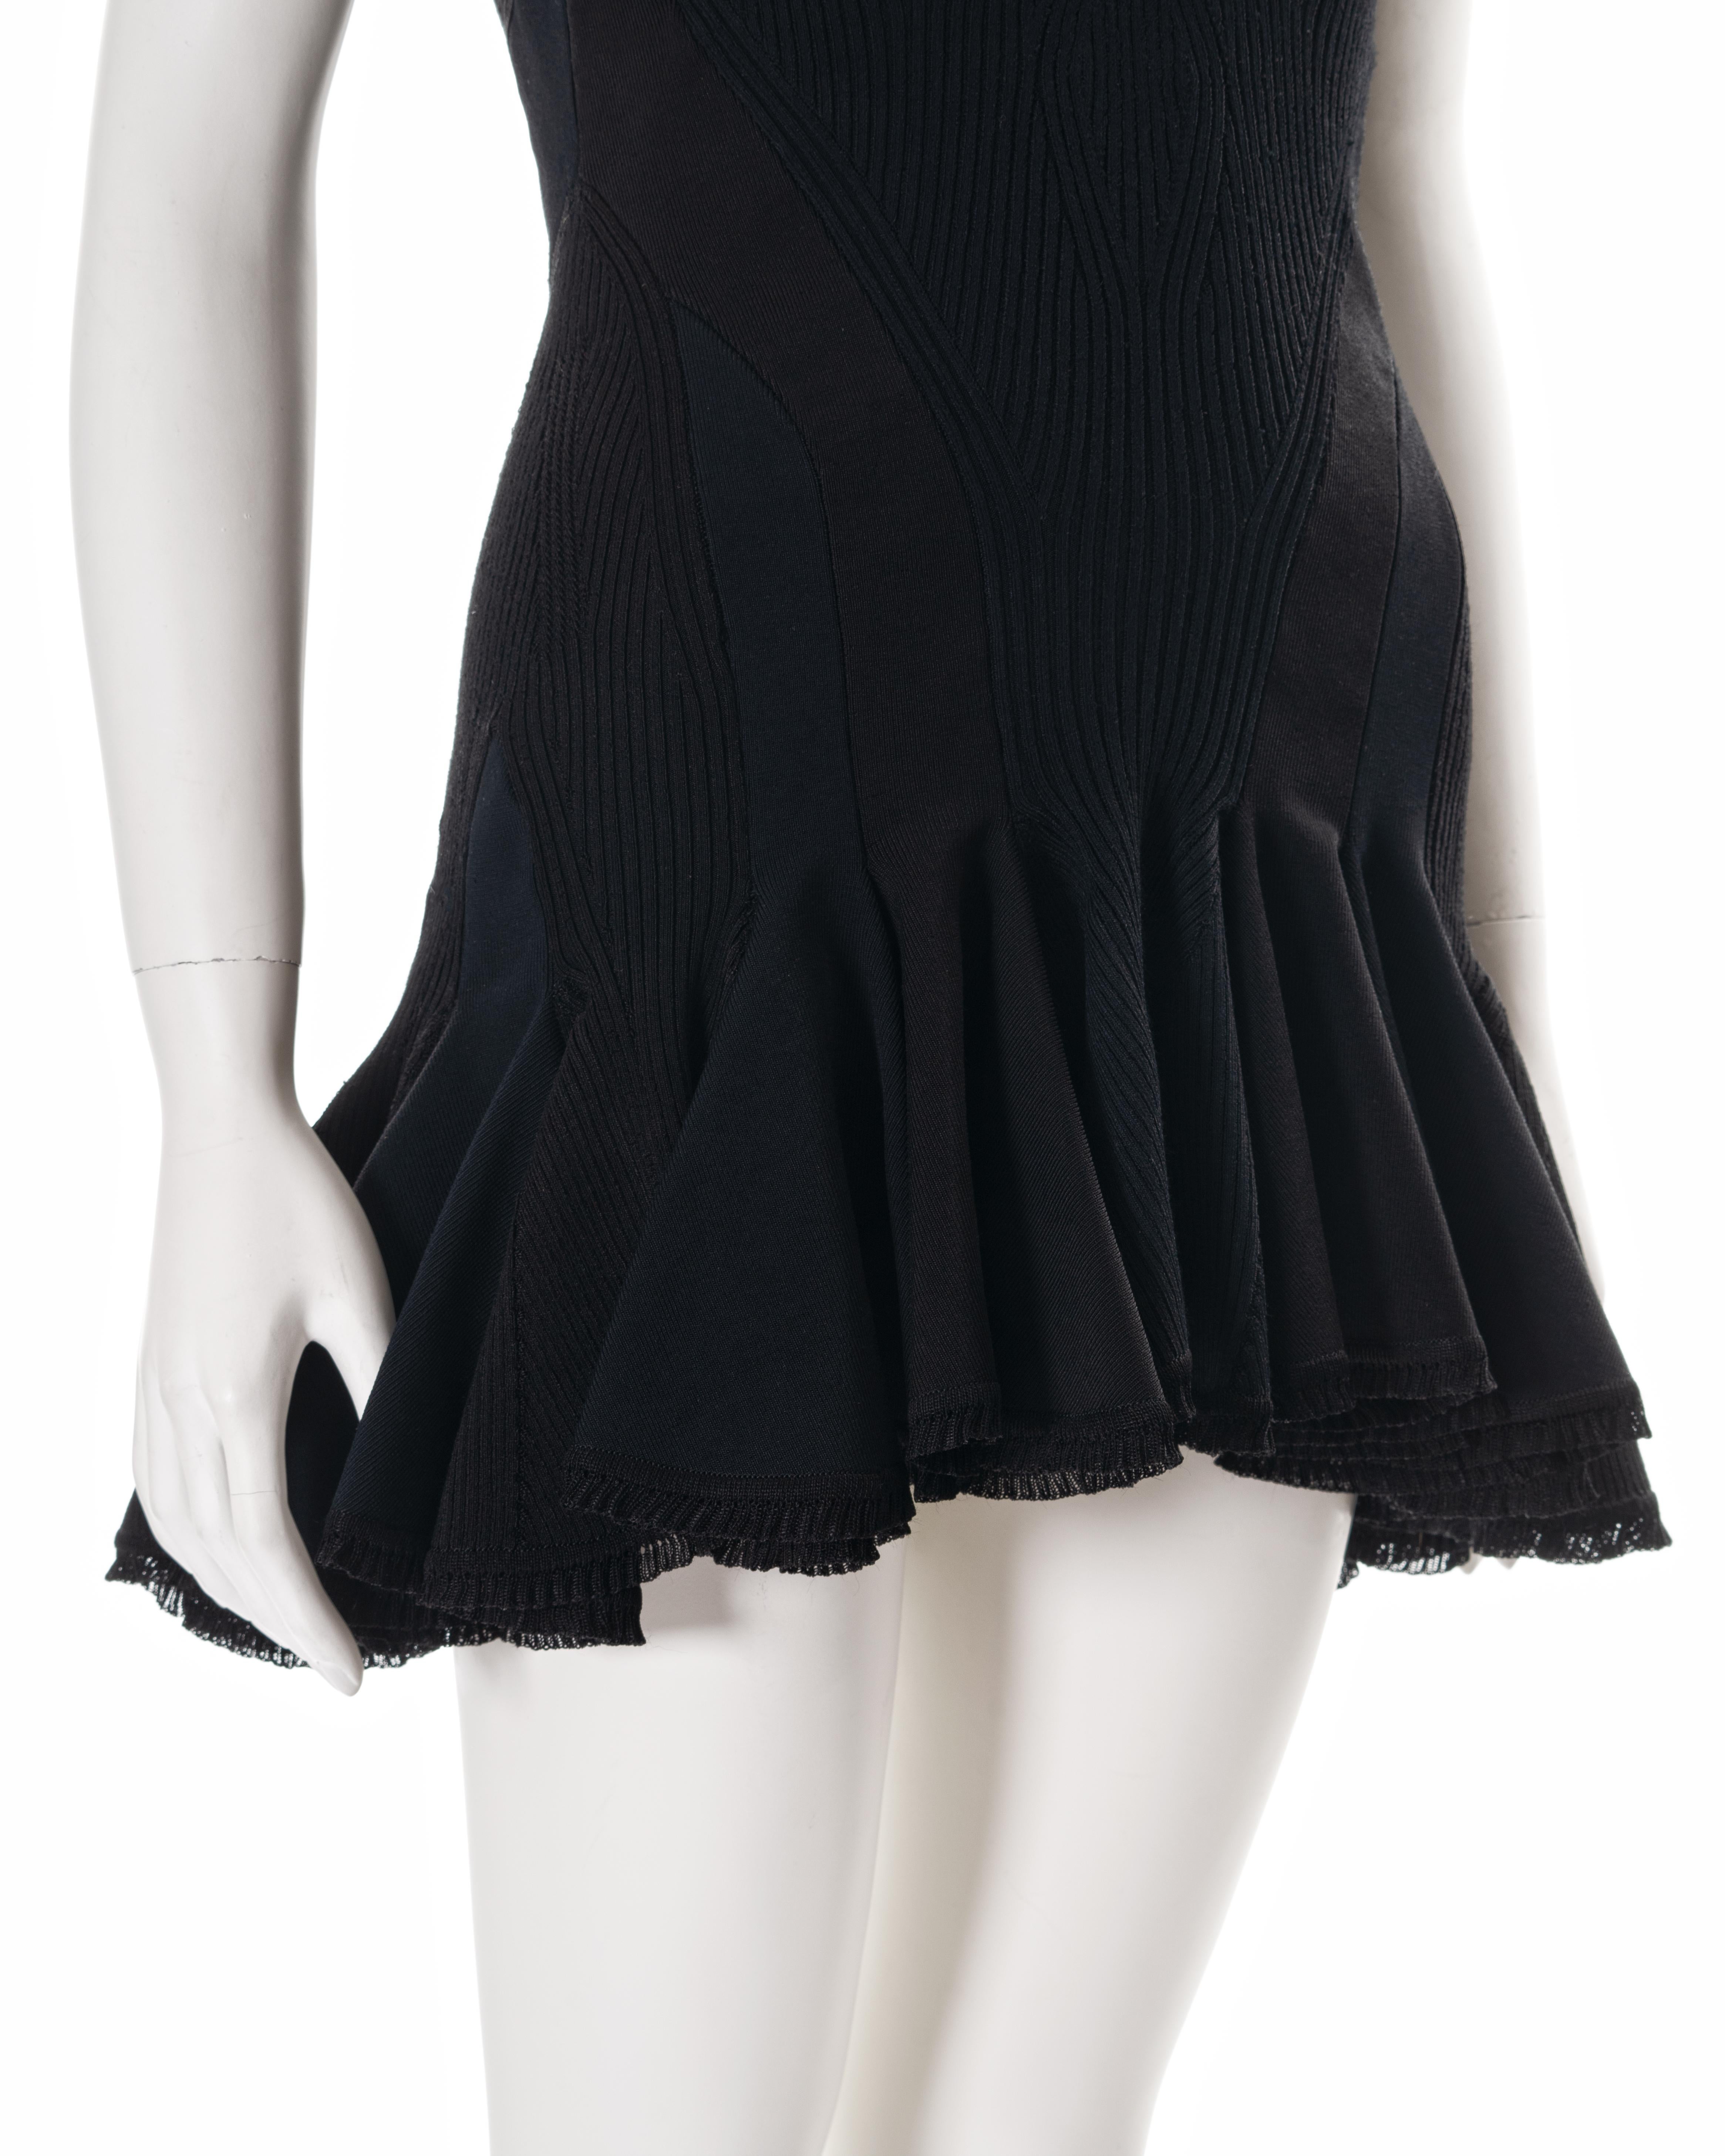 Alexander McQueen black rib knit mini dress with leather bustier, ss 2004 For Sale 2